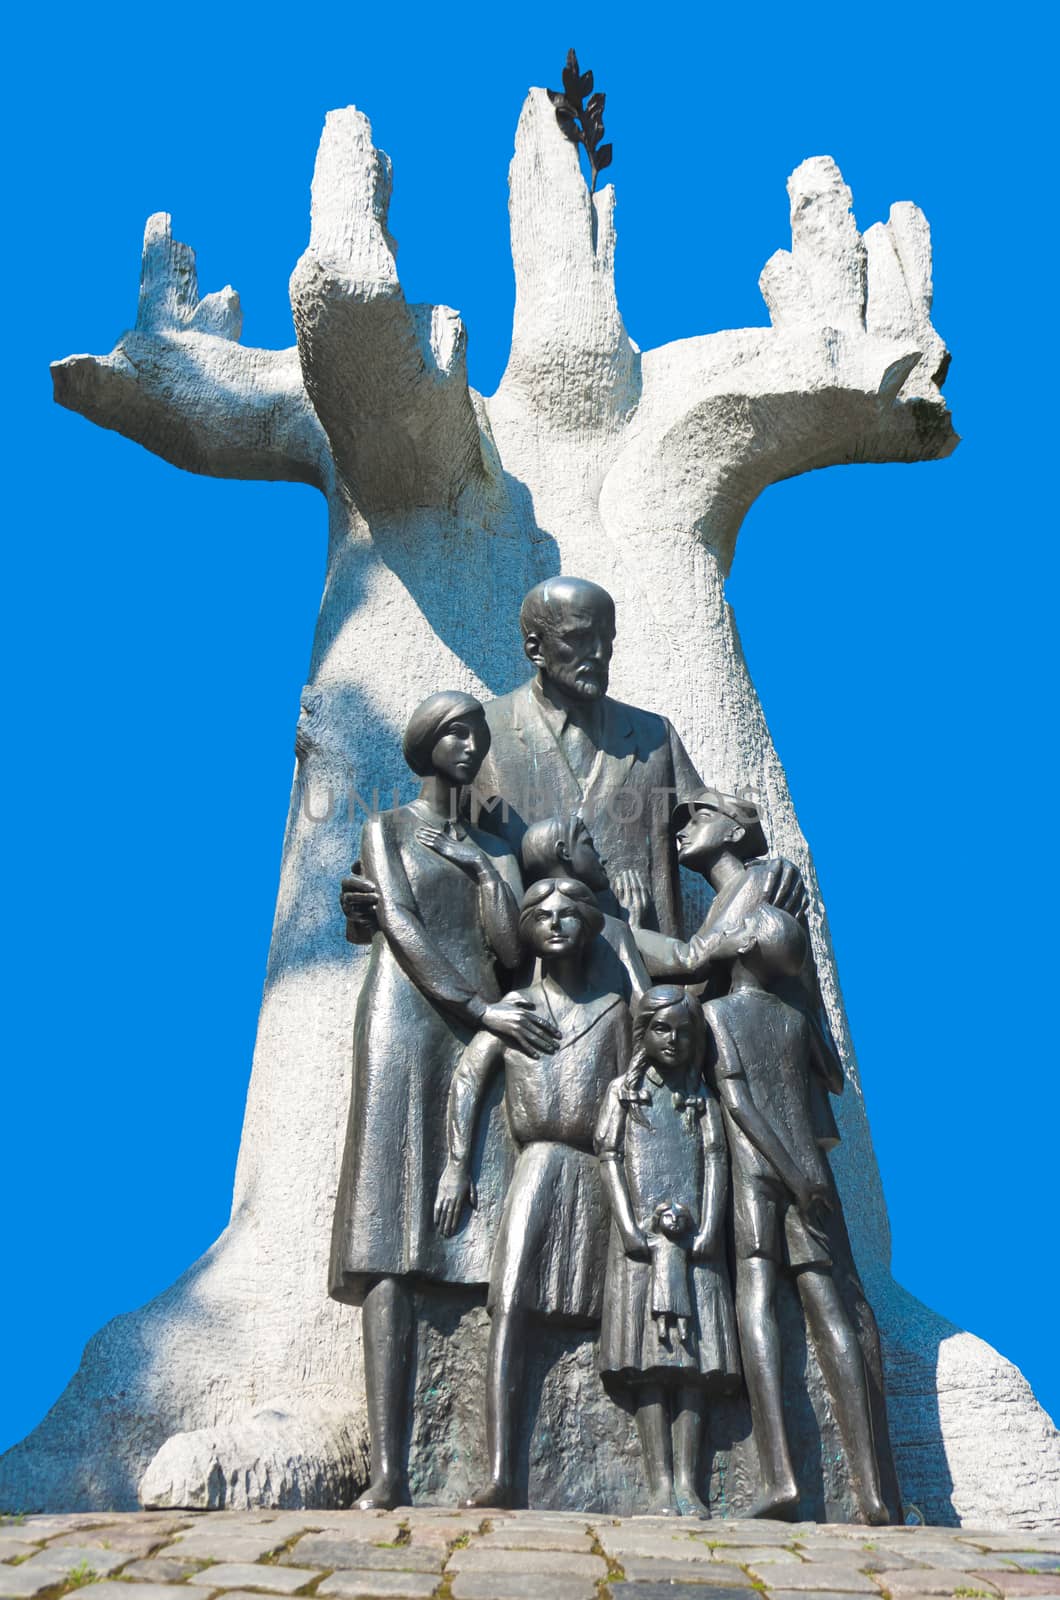 Korczak was a Polish educator, children's author, paediatrician and director of an orphanage in Warsaw. On 5 August 1942 he was sent with his orphans from the Warsaw Ghetto to Treblinka death camp and murdered by the Germans in the gas chamber.